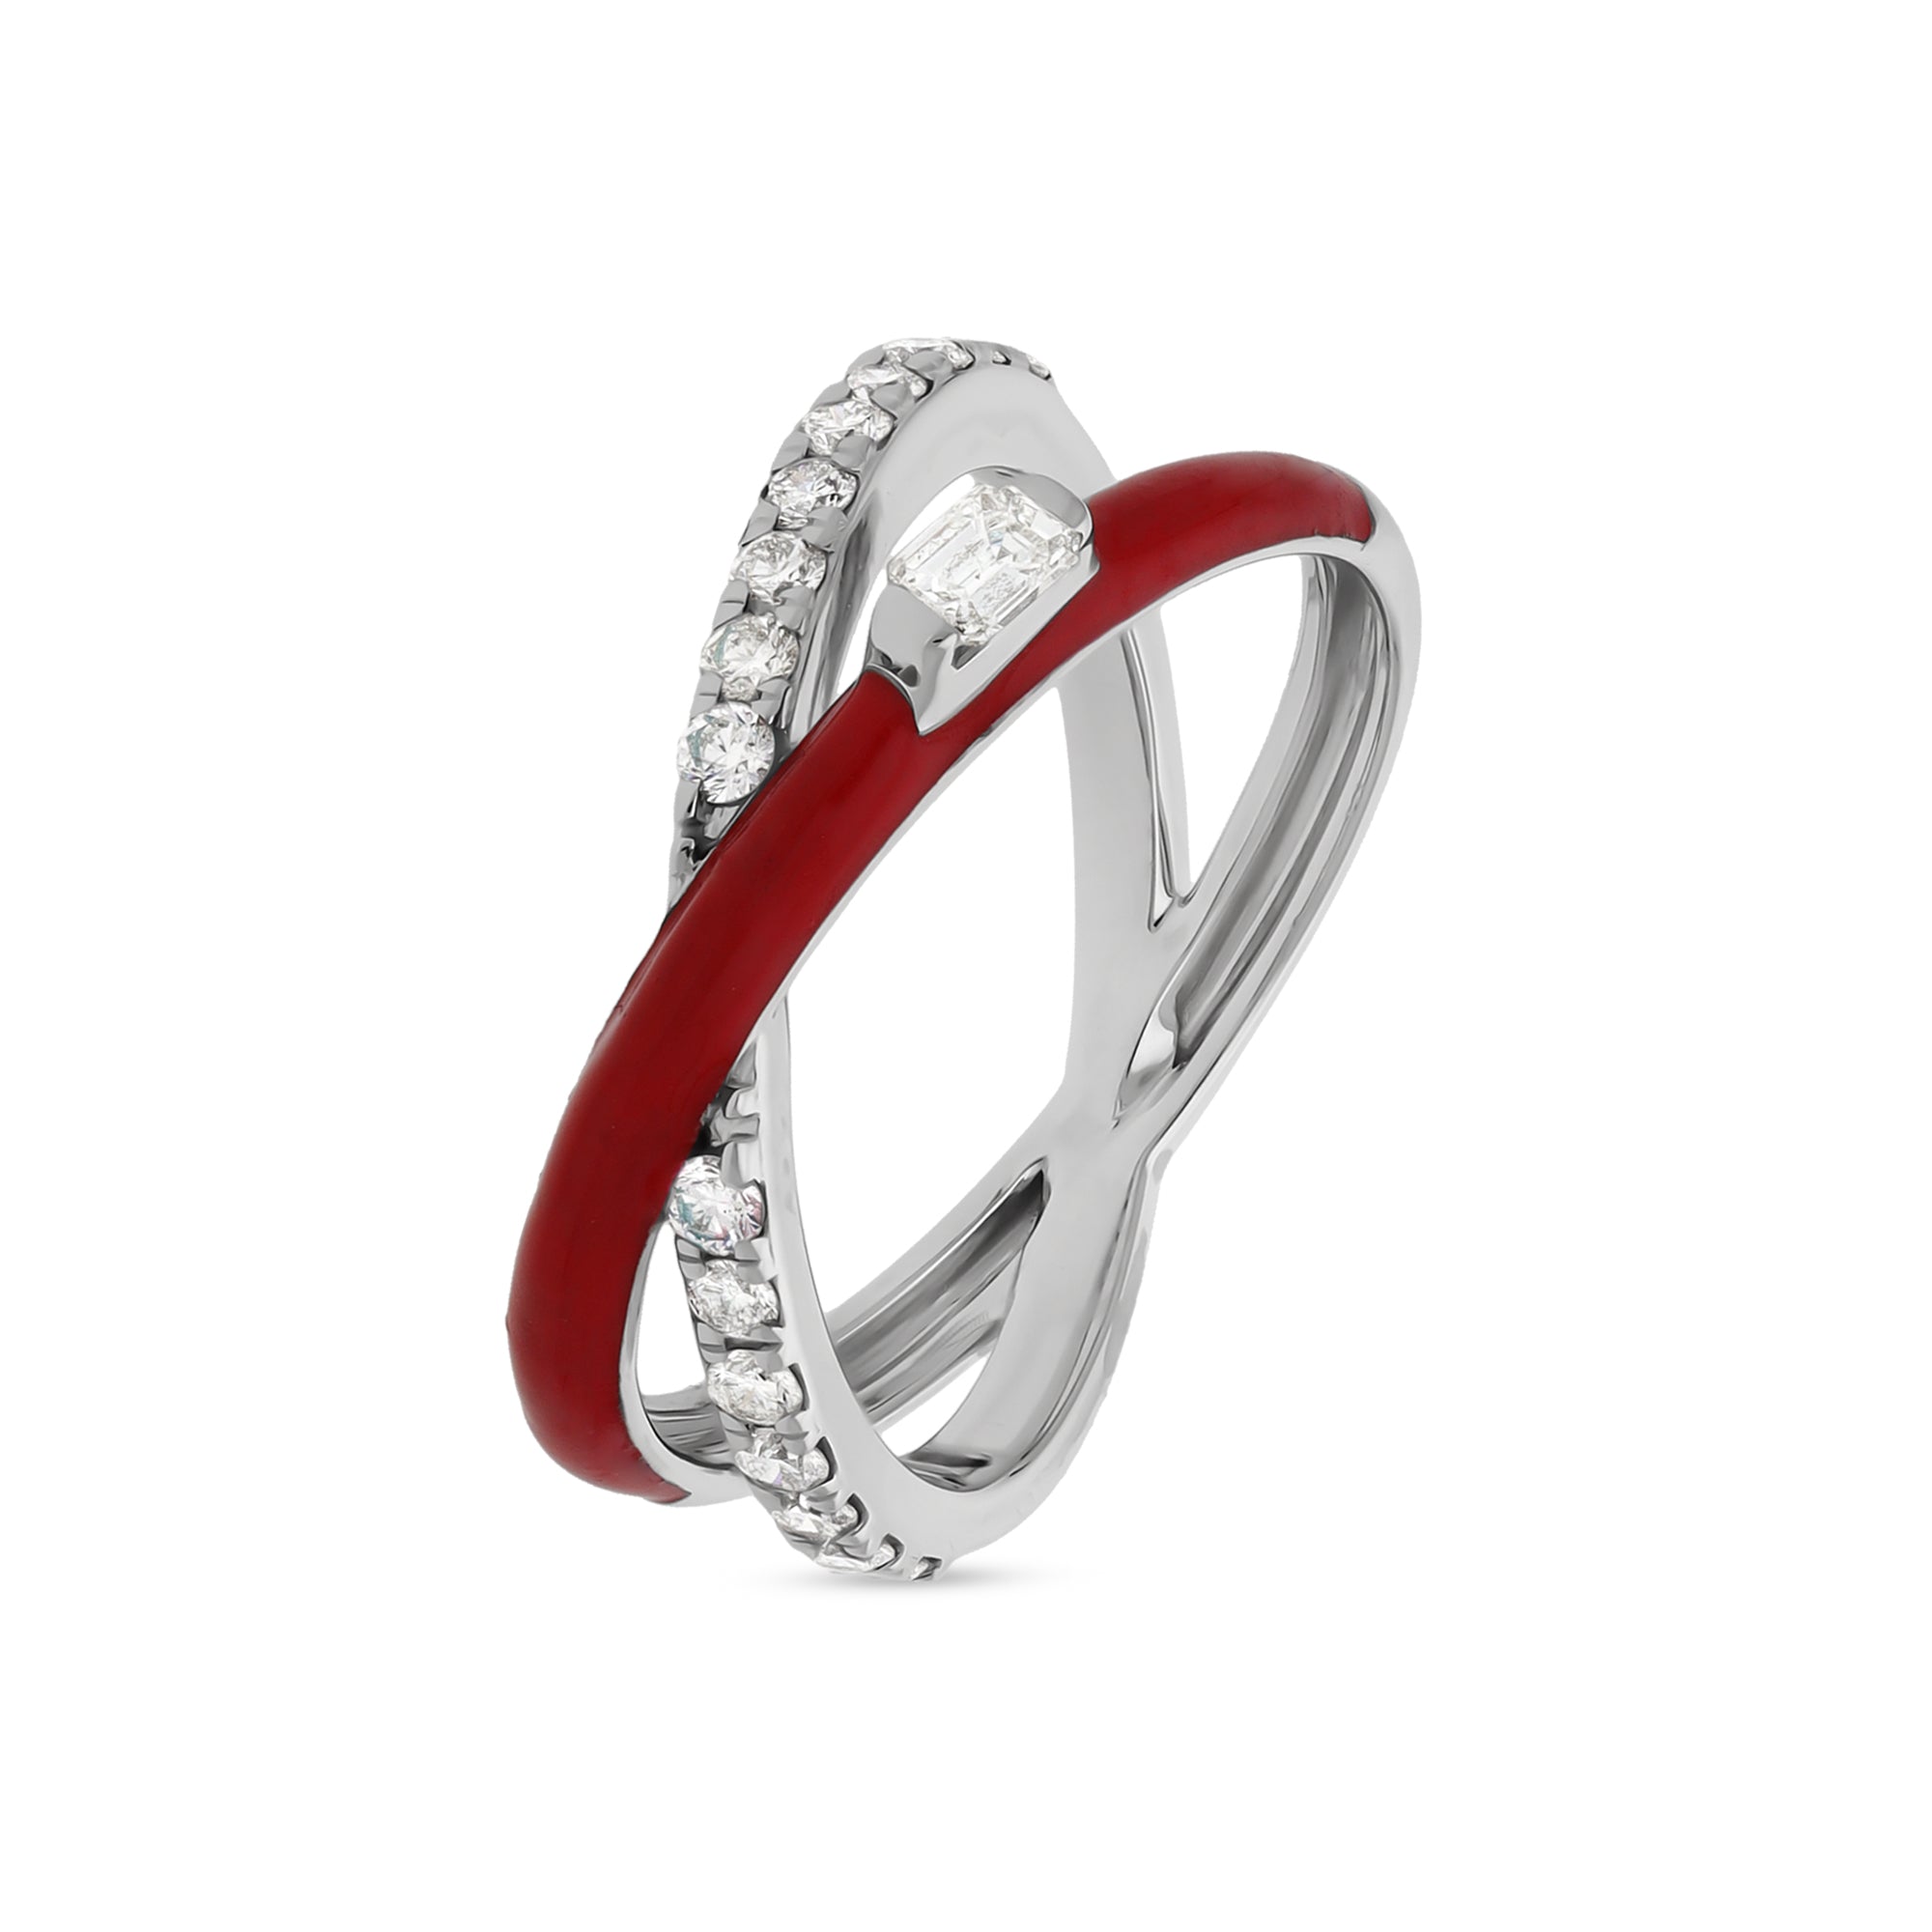 Red Enamel With Emerald Shape Diamond Crisscross White Gold Casual Ring